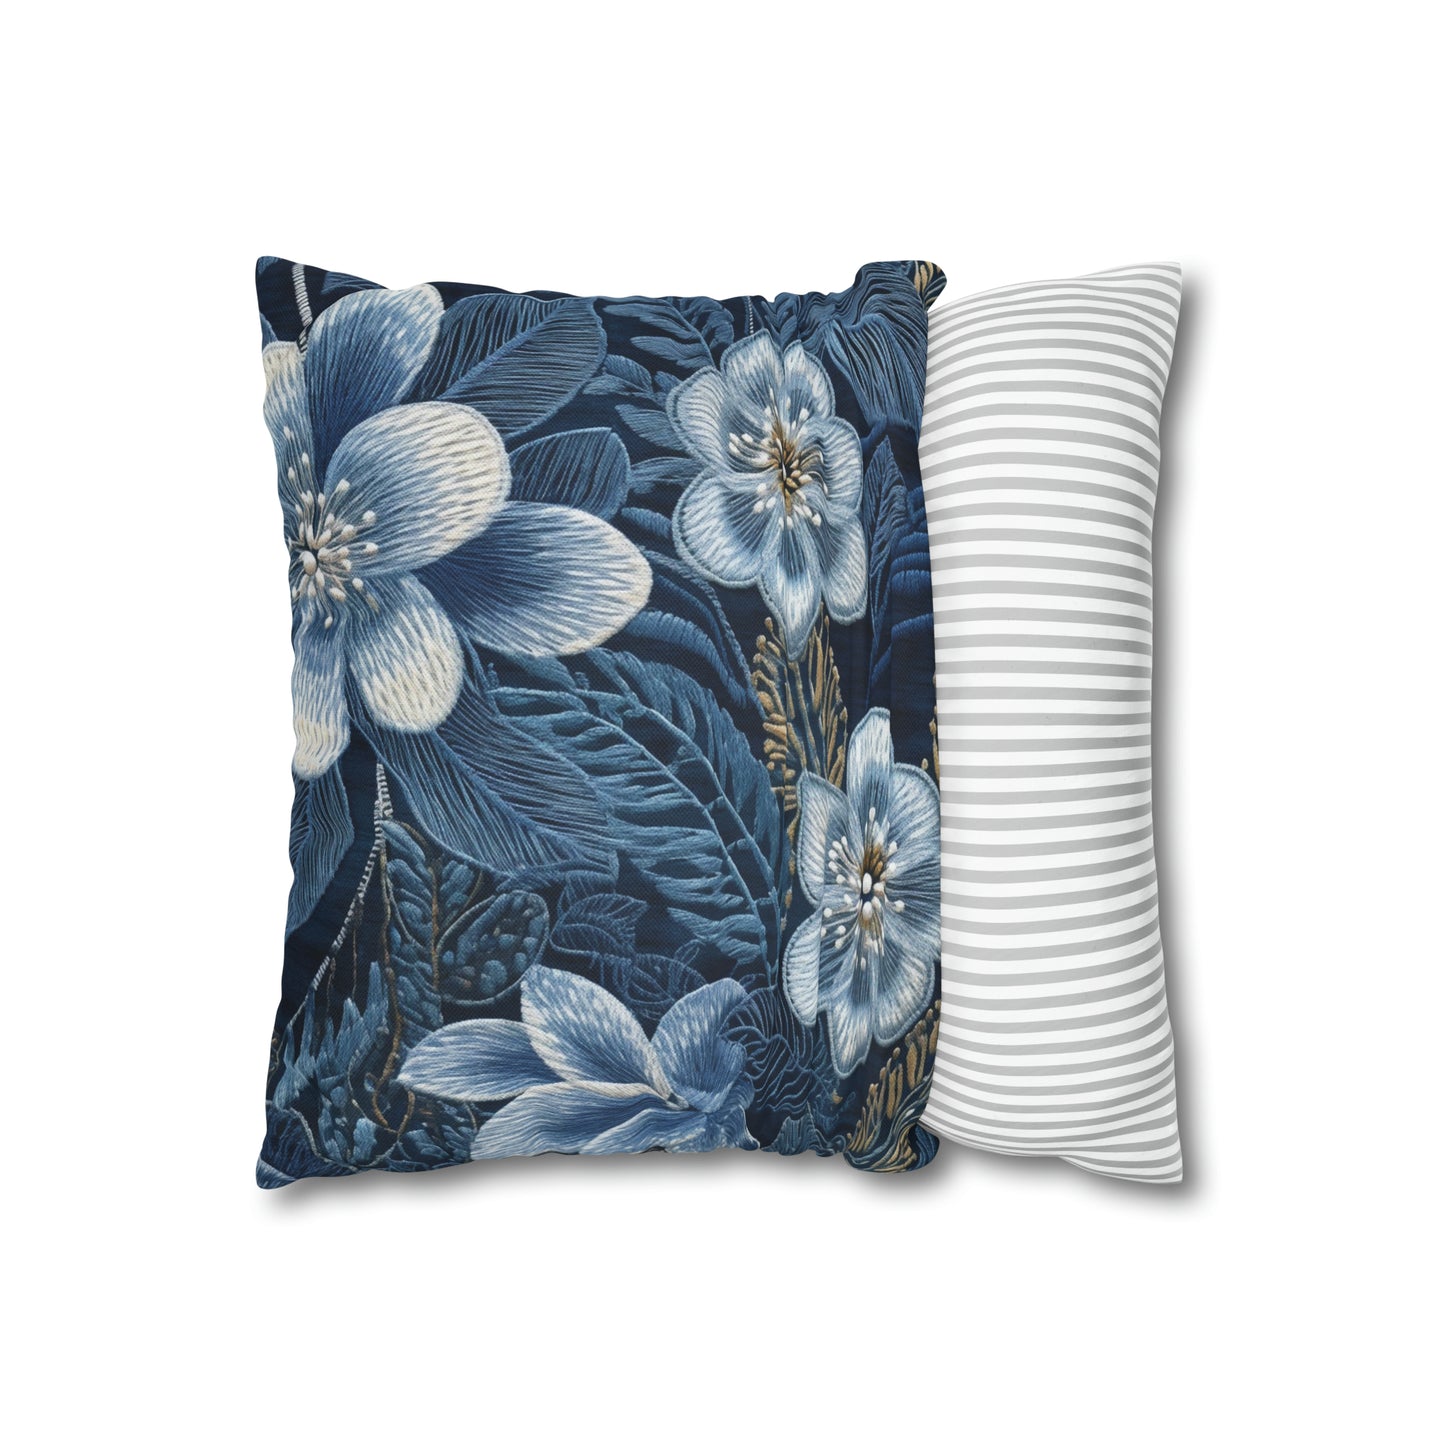 Flower Blossom Embroidery Floral on Denim Style - Spun Polyester Square Pillow Case